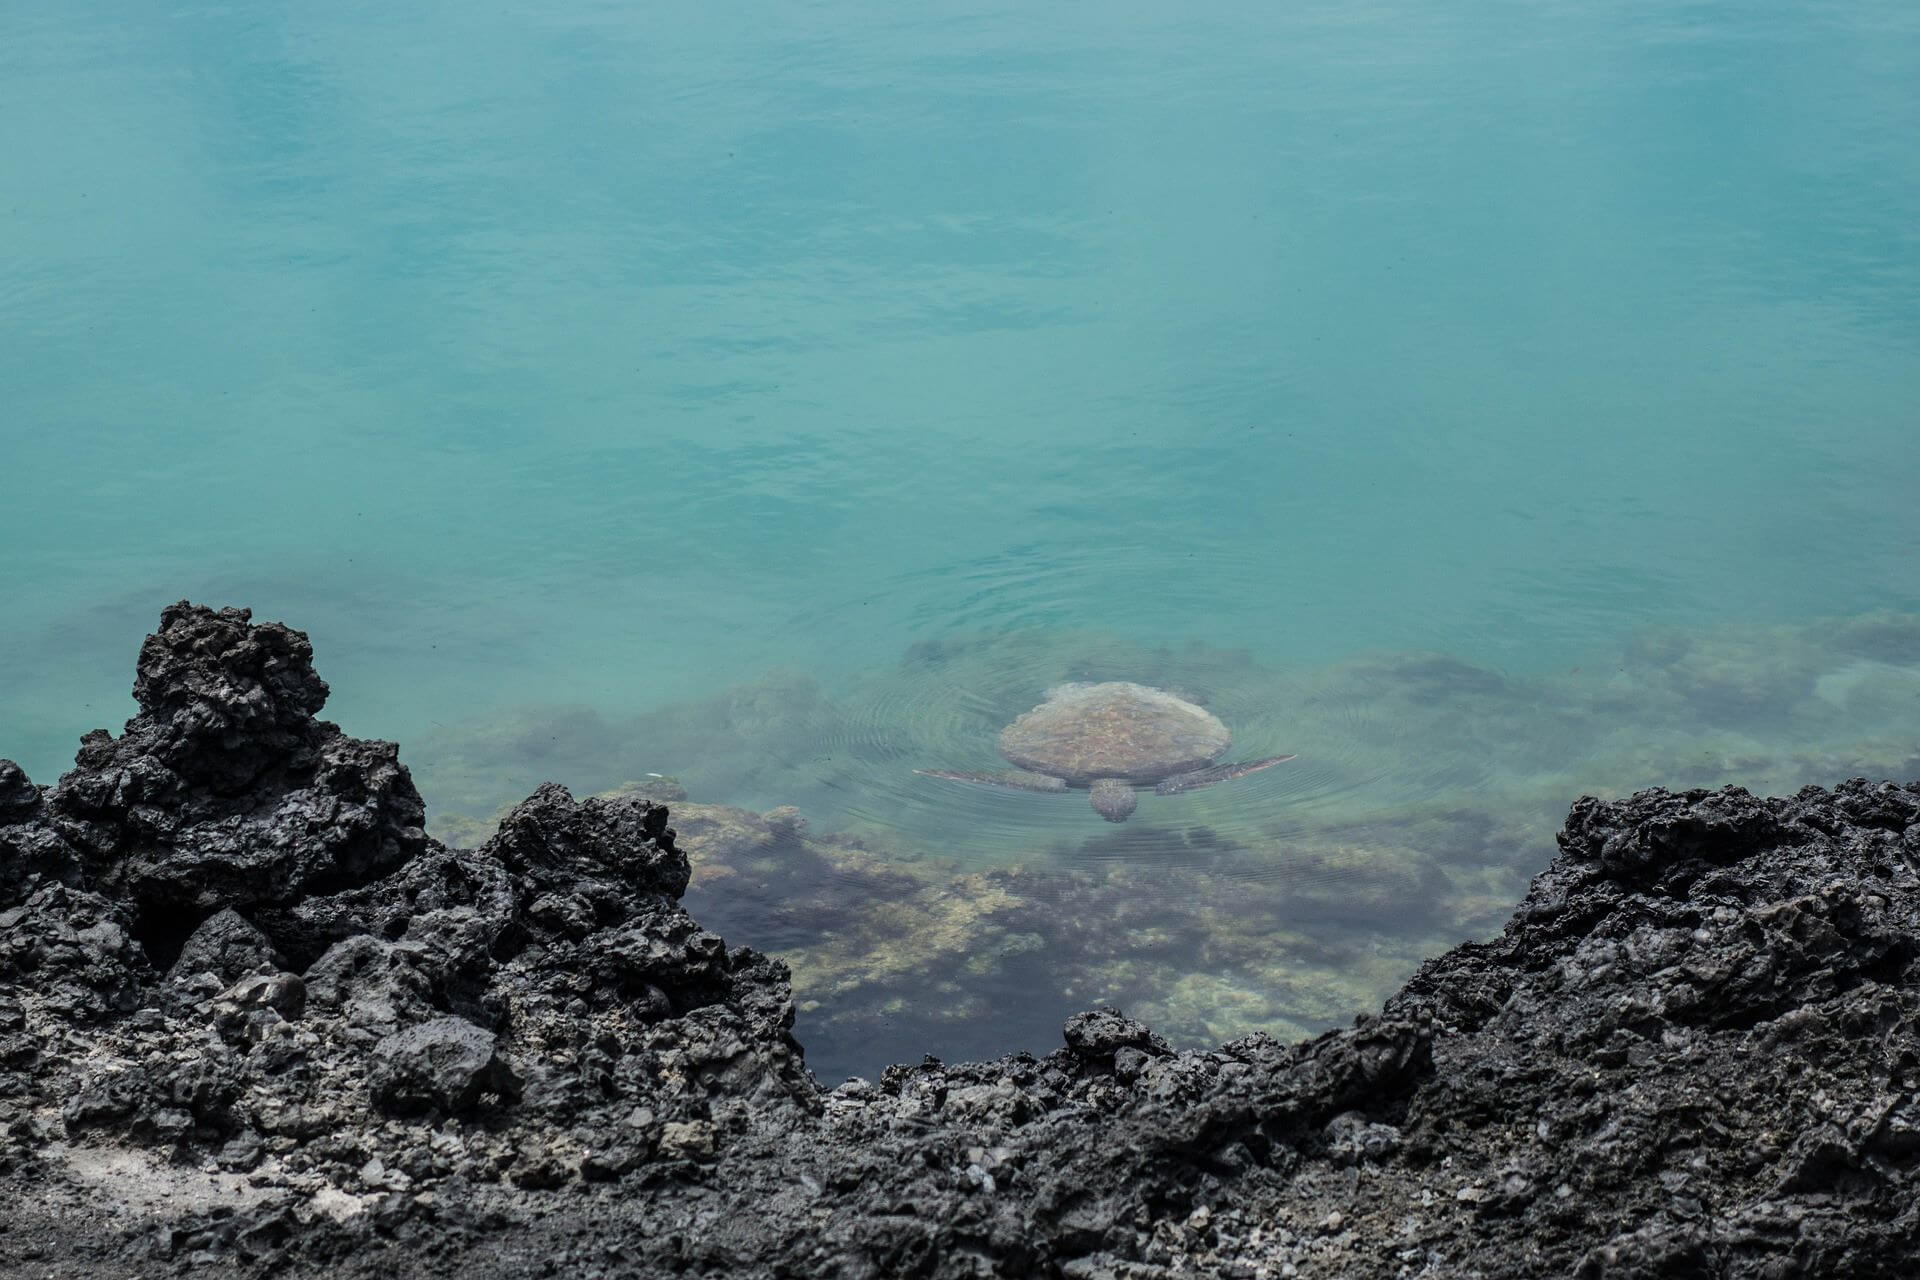 A sea turtle in the Galápagos